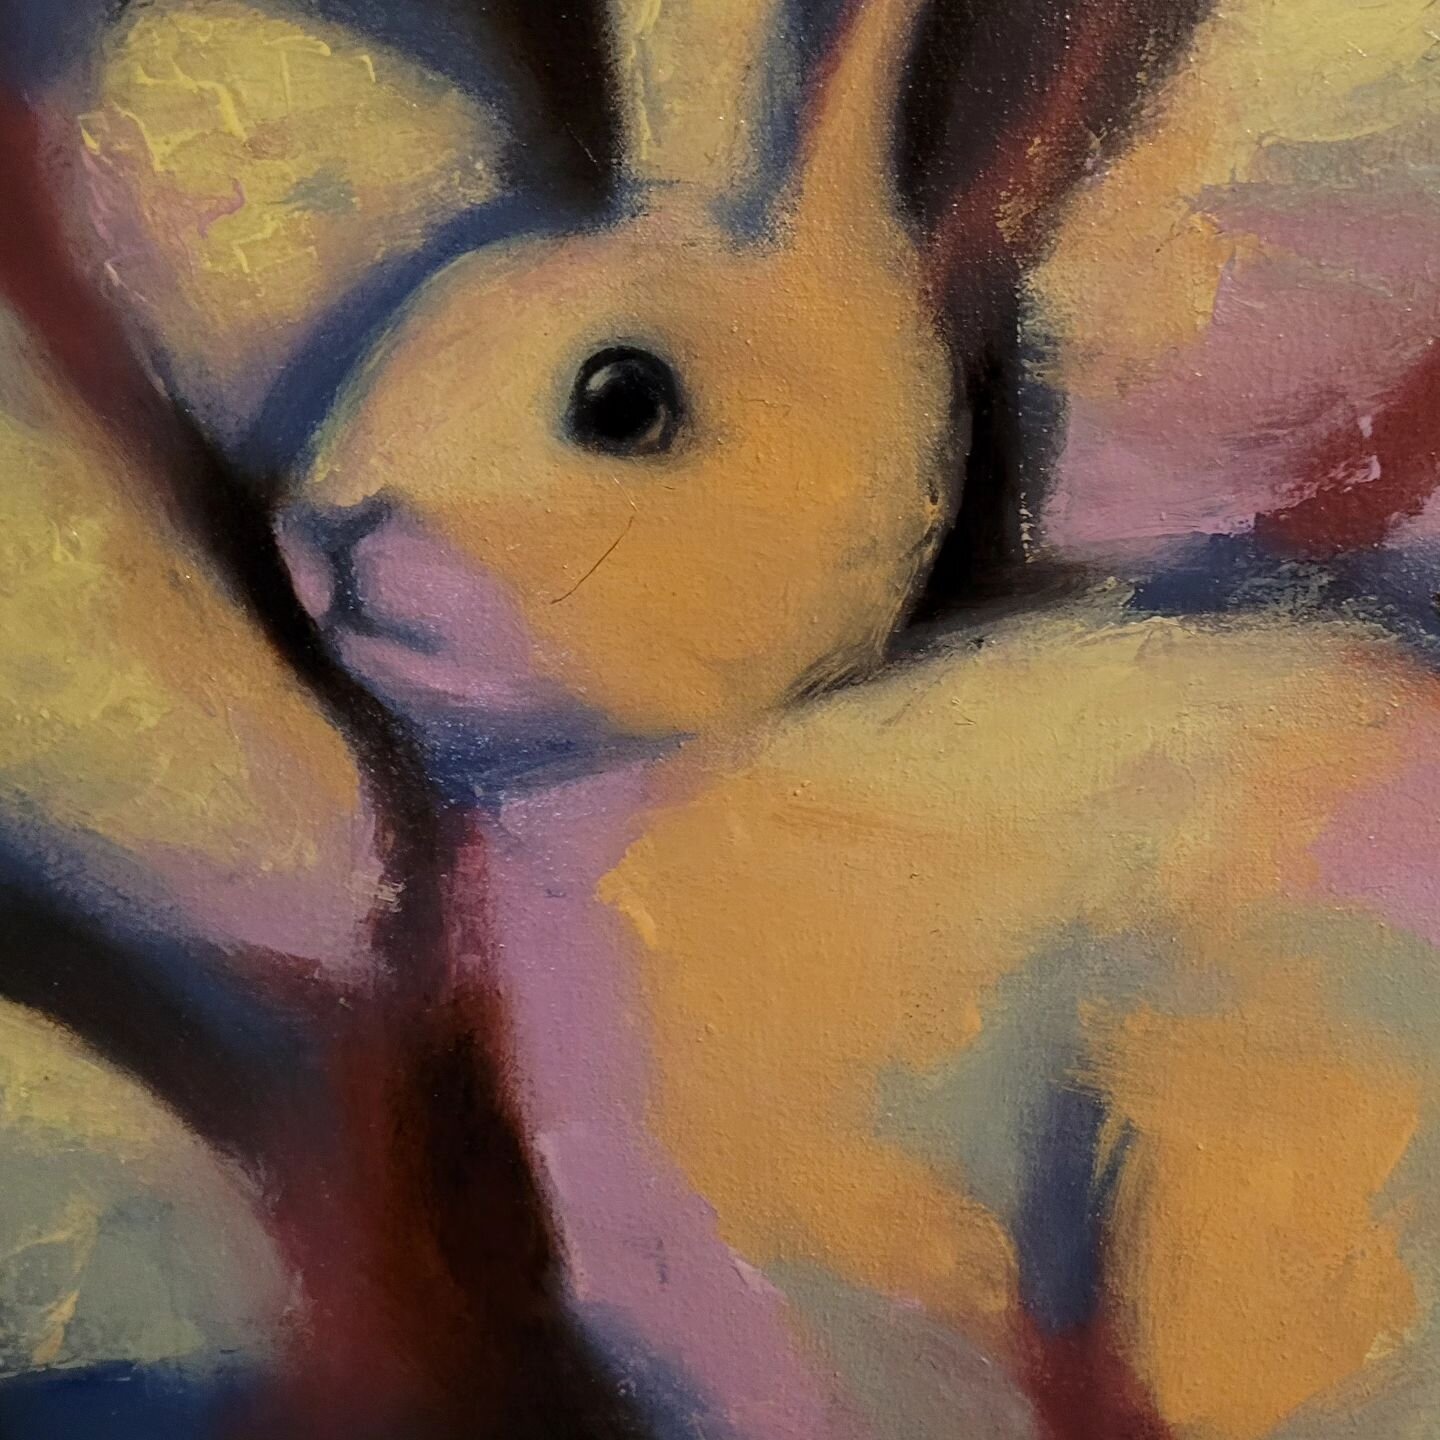 Today I oiled out my rabbit painting. Sometimes when an oil painting dries, it will look a little dull the dark areas. Oiling how is a process of literally brushing oil (I use walnut oil) over the entire painting. It's almost like you are feeding the